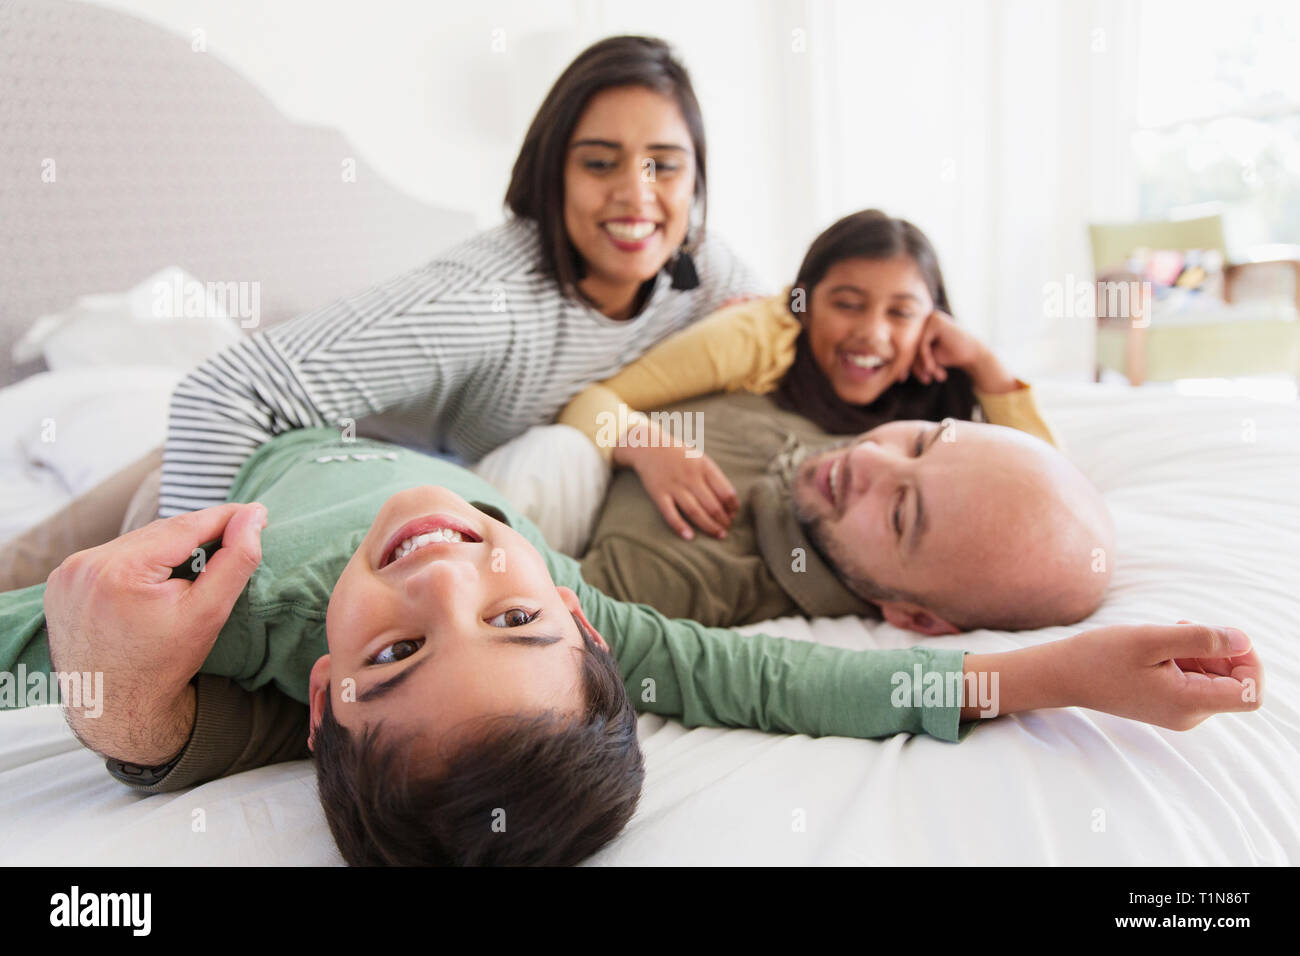 Happy family cuddling on bed Stock Photo